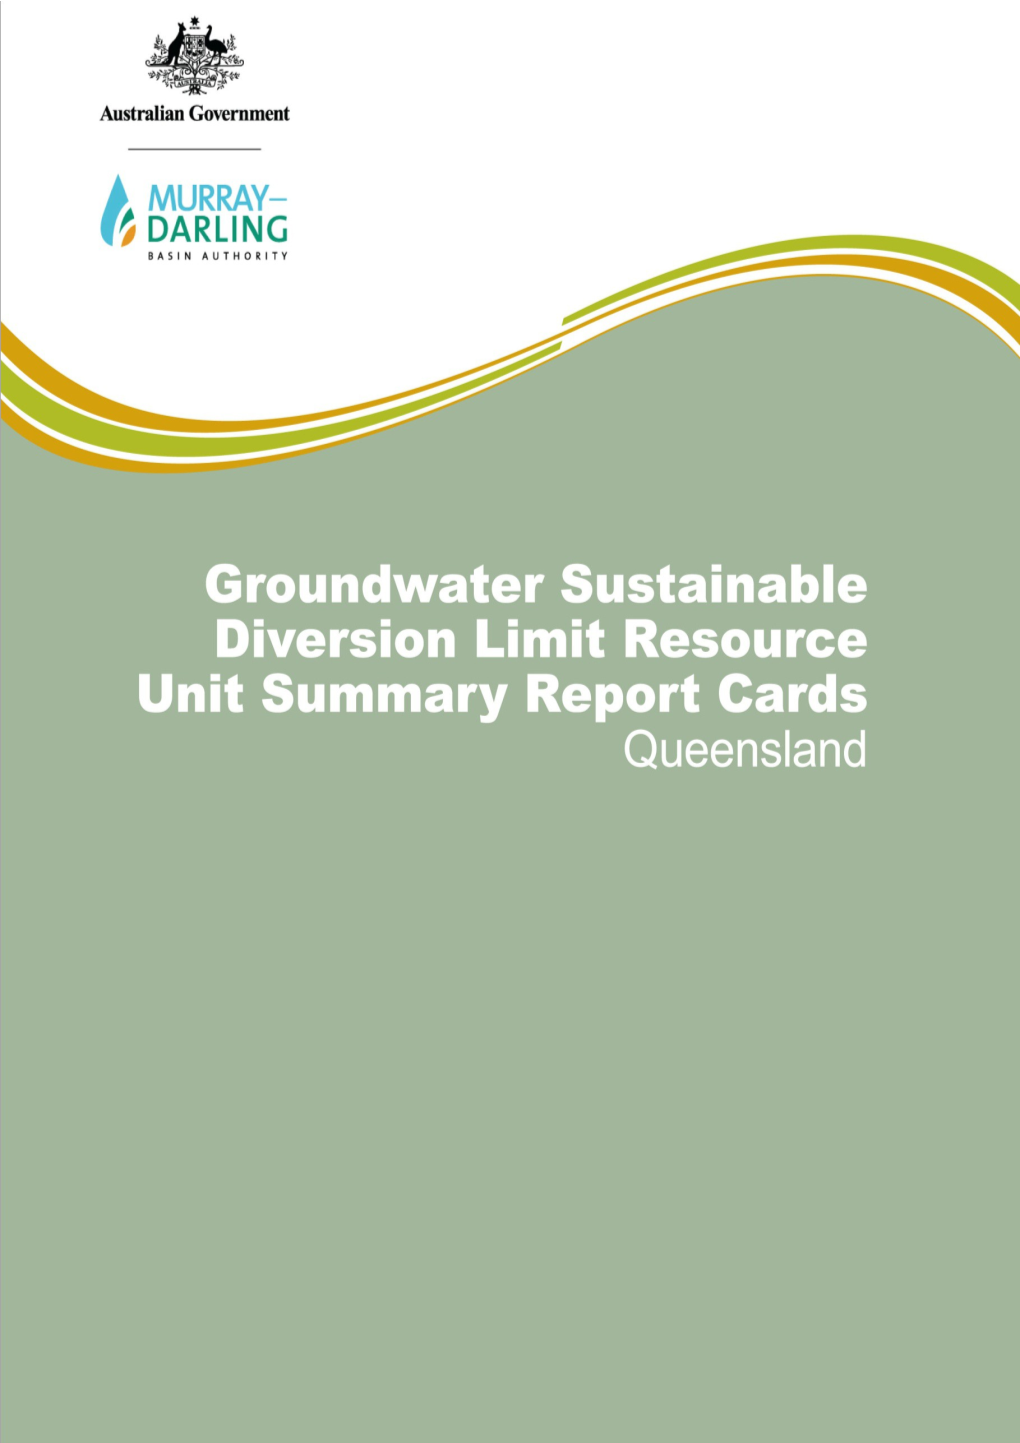 Groundwater Sustainable Diversion Limit Resource Unit Summary Report Cards - Queensland